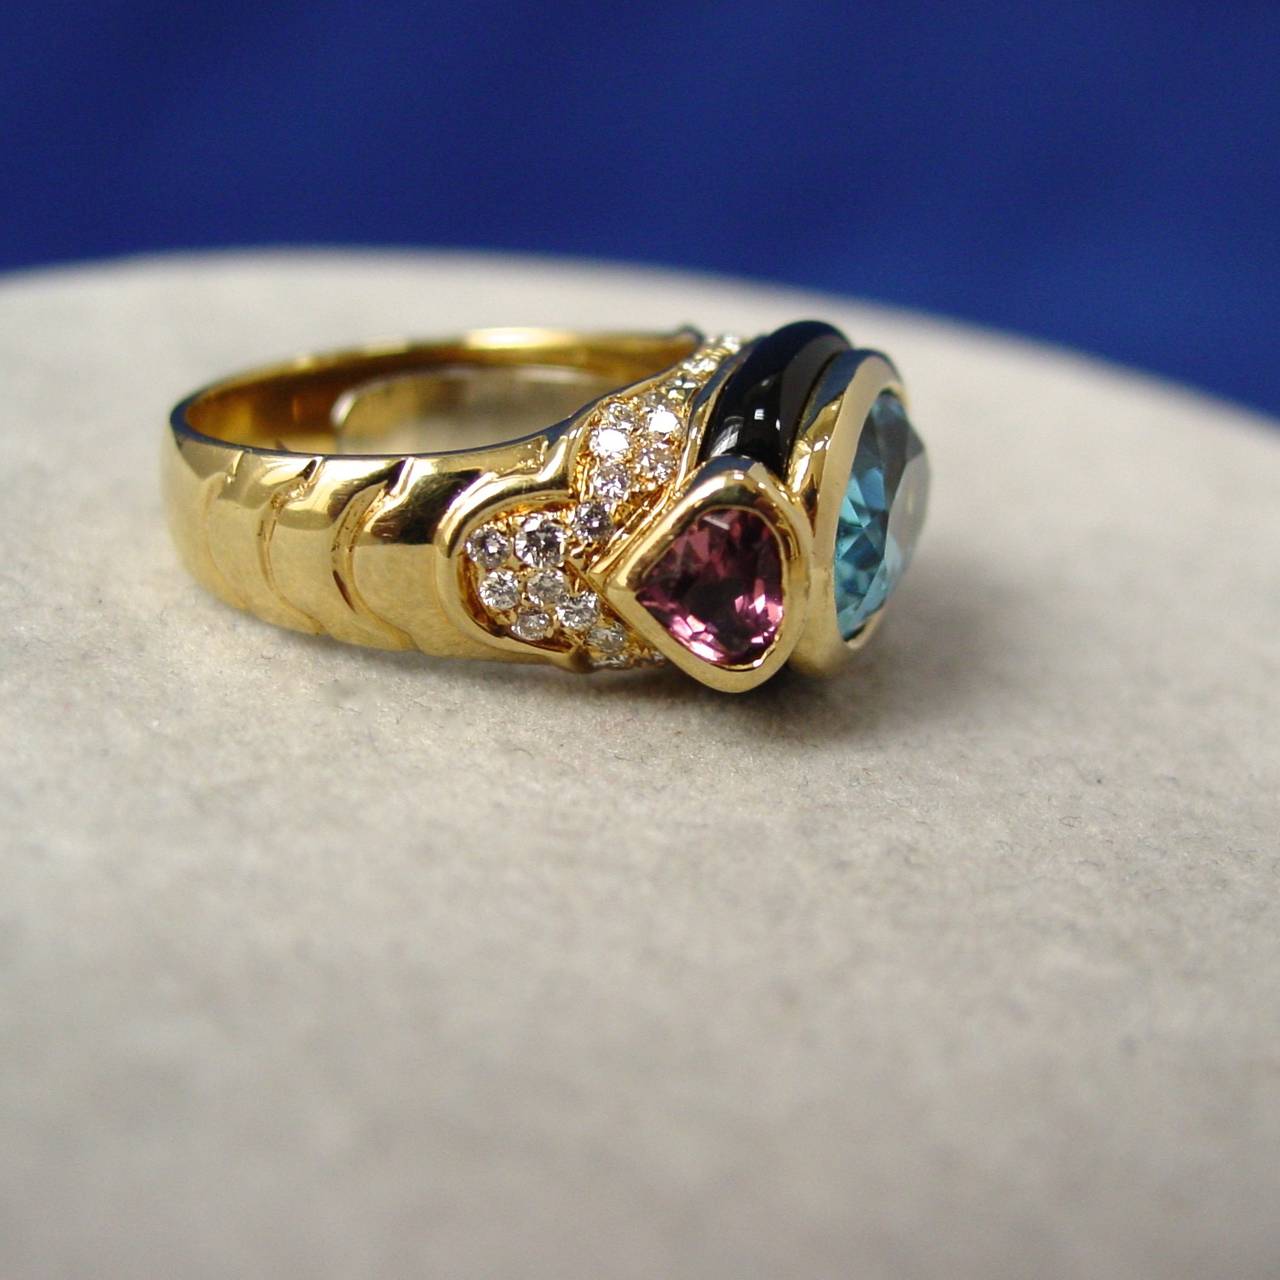 A Marina B Blue Topaz, Tourmaline, Onyx and Diamond Ring. The ring is set with a center oval shaped blue topaz, flanked by two heart shaped pink tourmalines and accented by onyx and round cut diamonds weighing approximately .50 carats. Signed Marina